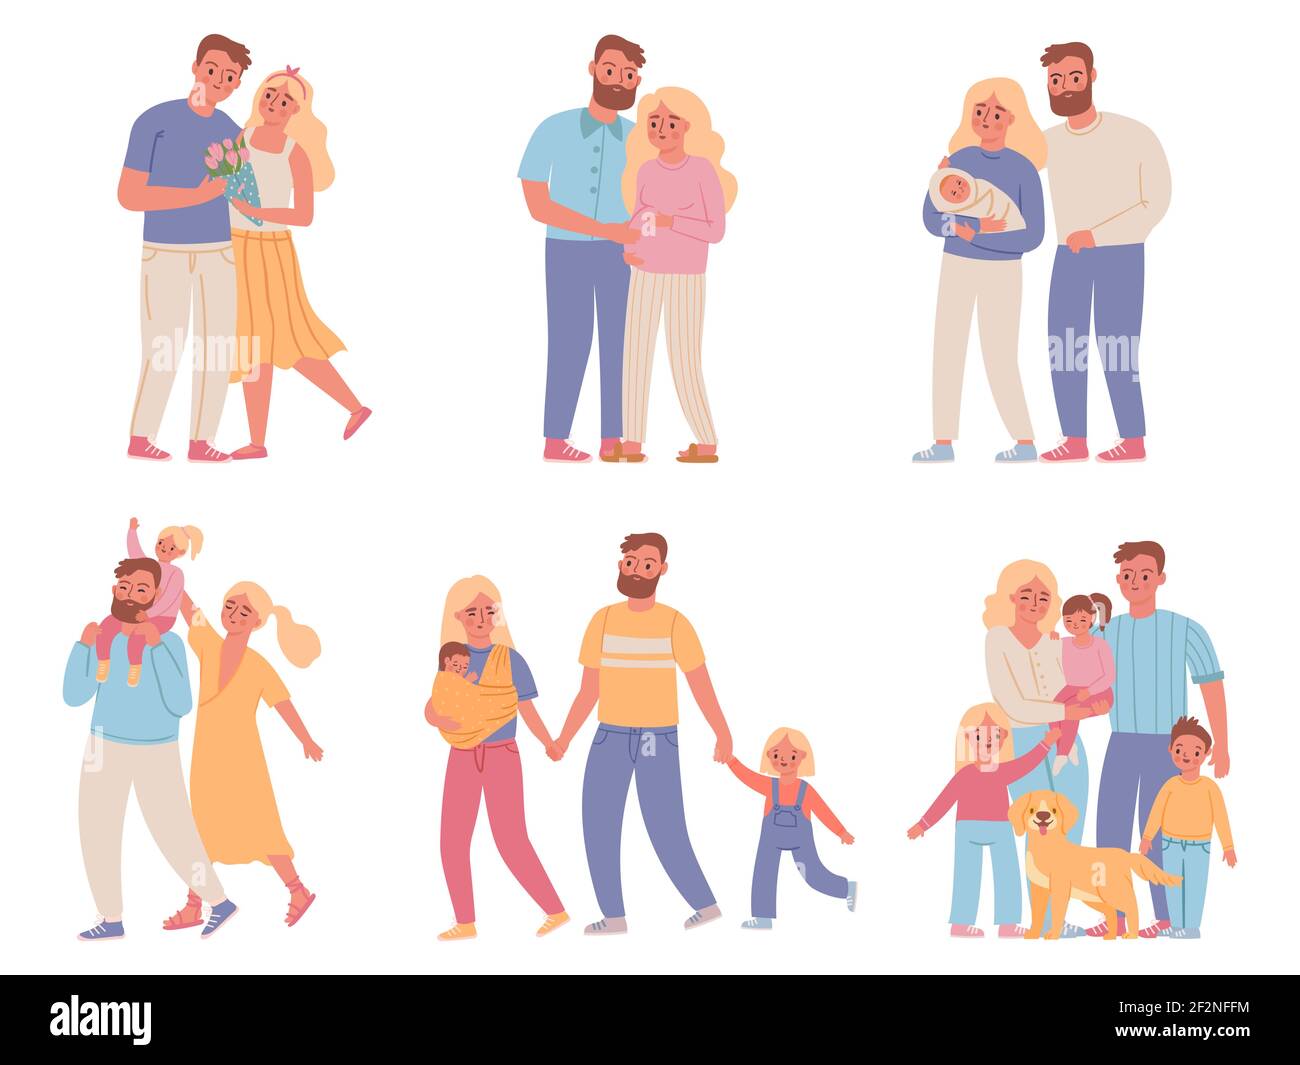 Family stages. Love couple relationship, marriage, pregnant woman, parents and newborn baby, mom, dad and kid. Family development vector set Stock Vector